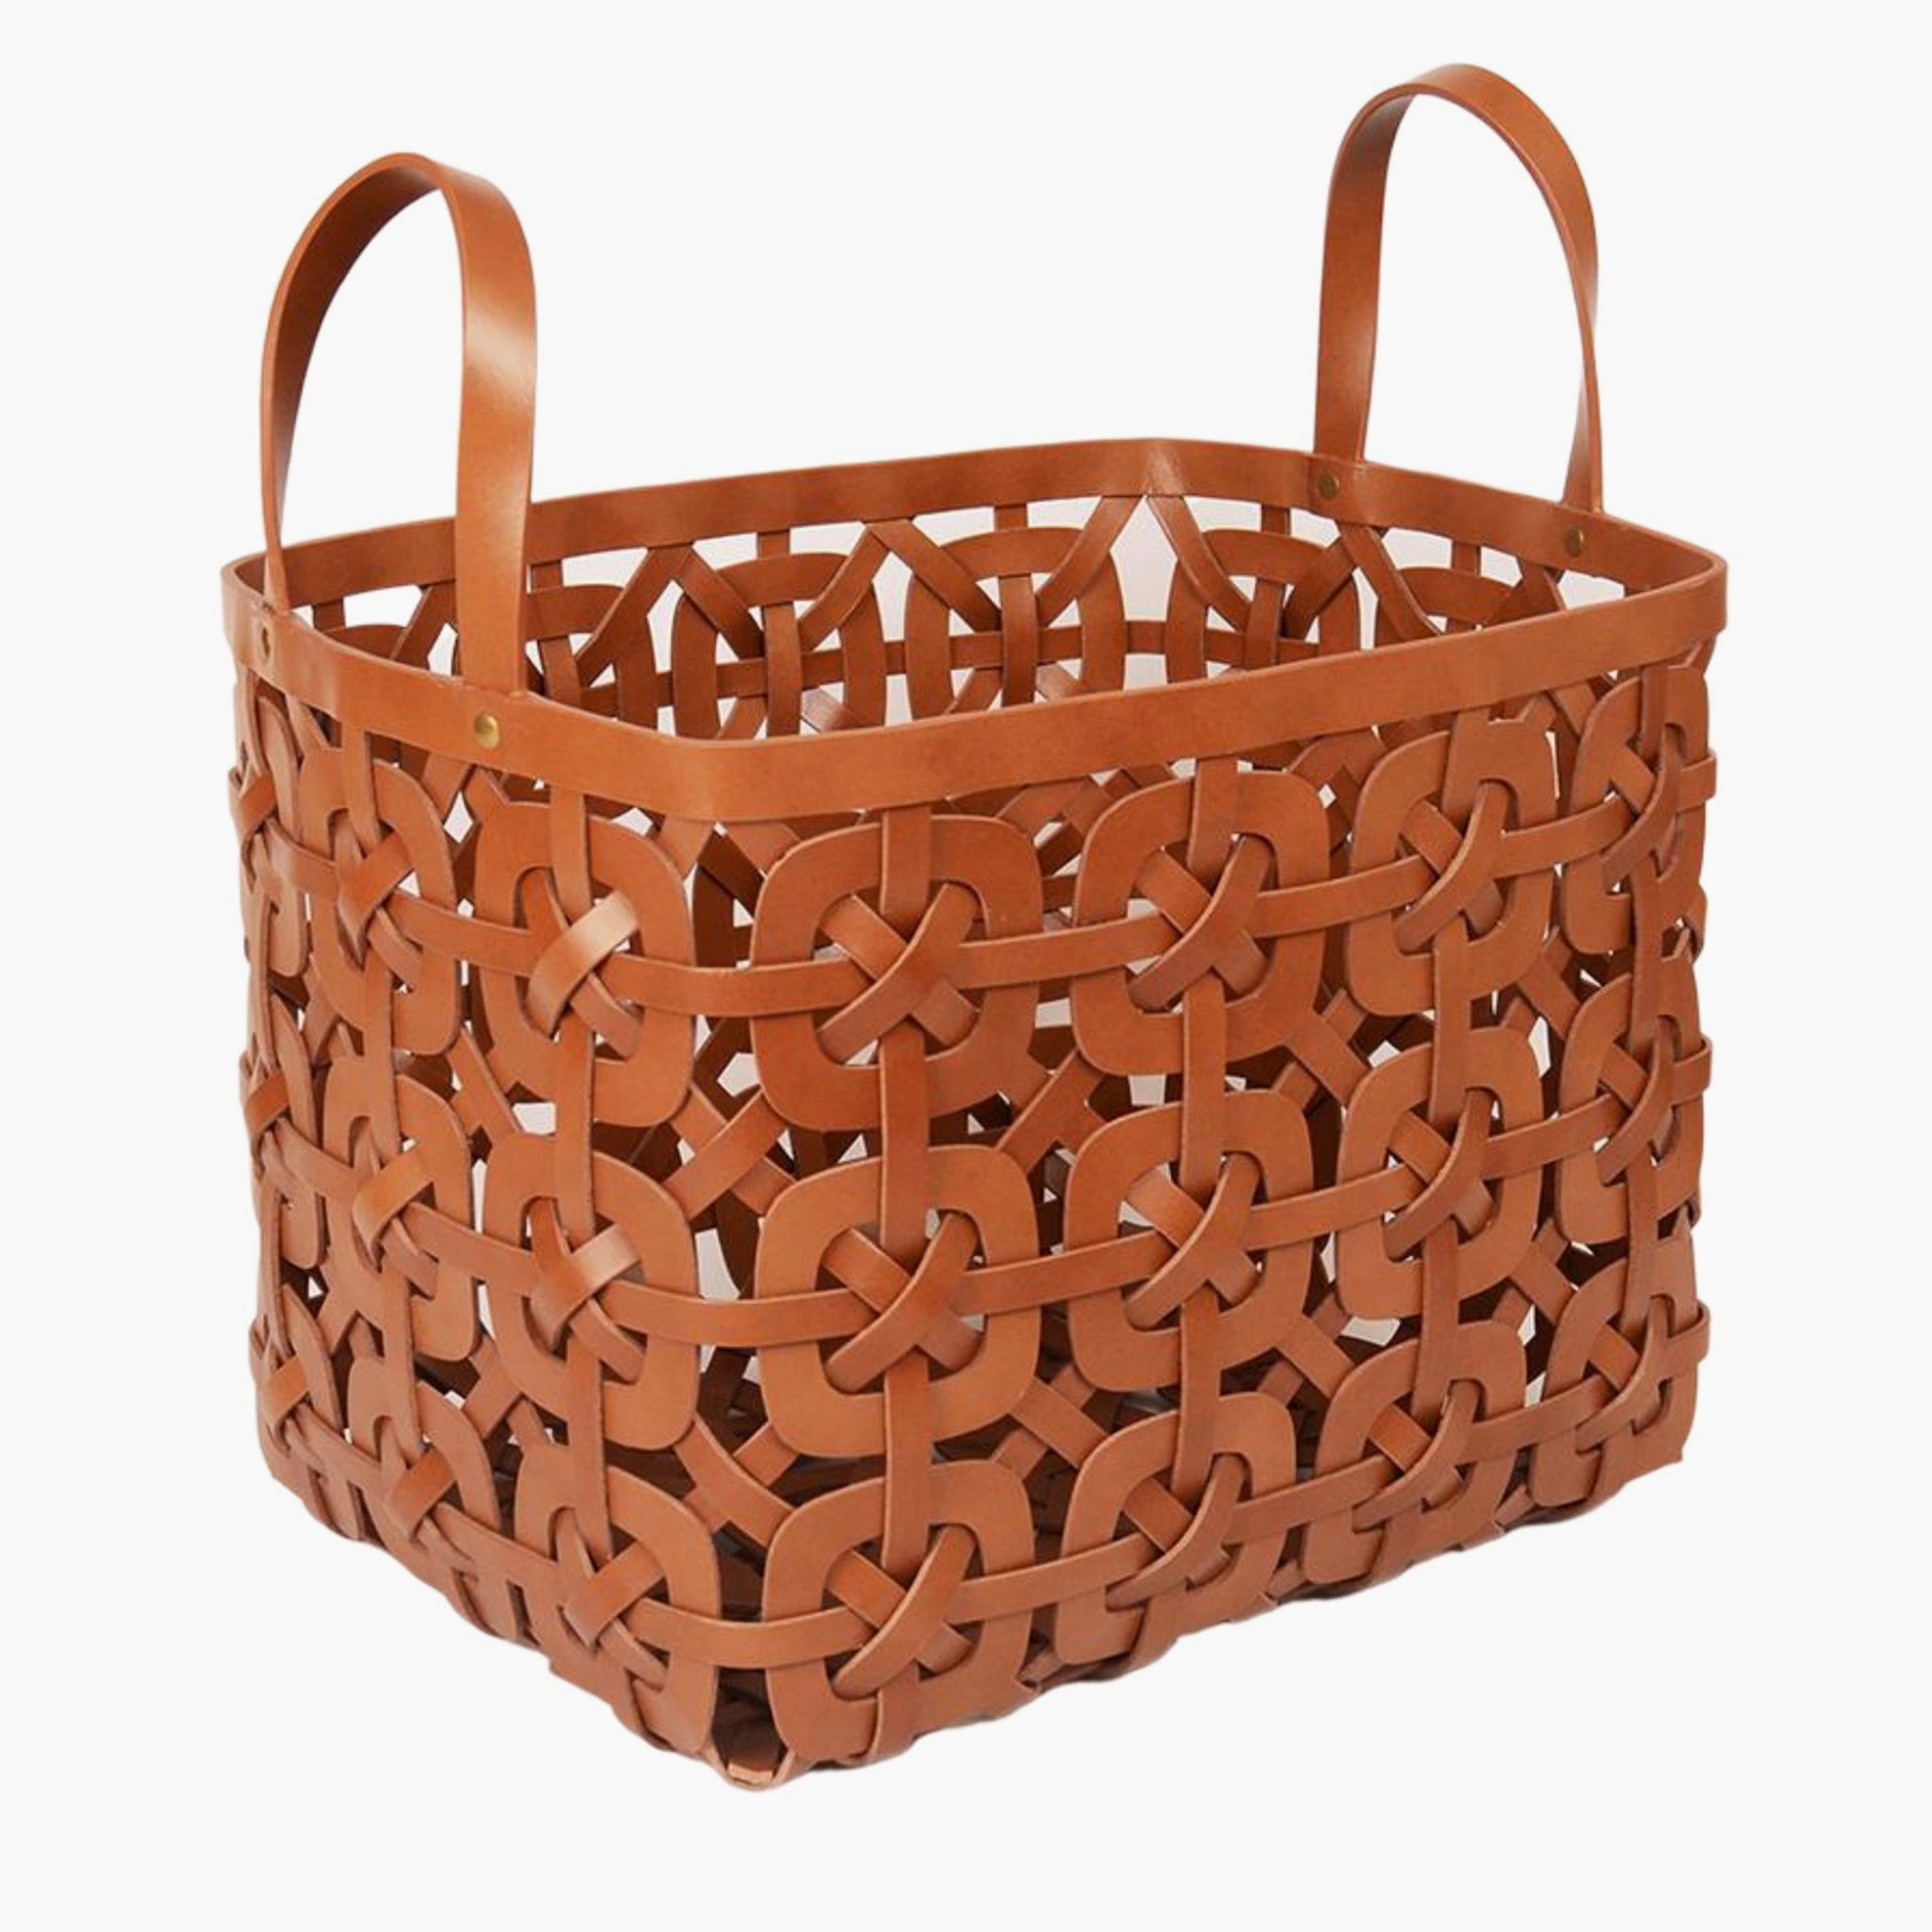 Inherent Recycled Leather Weaving Basket